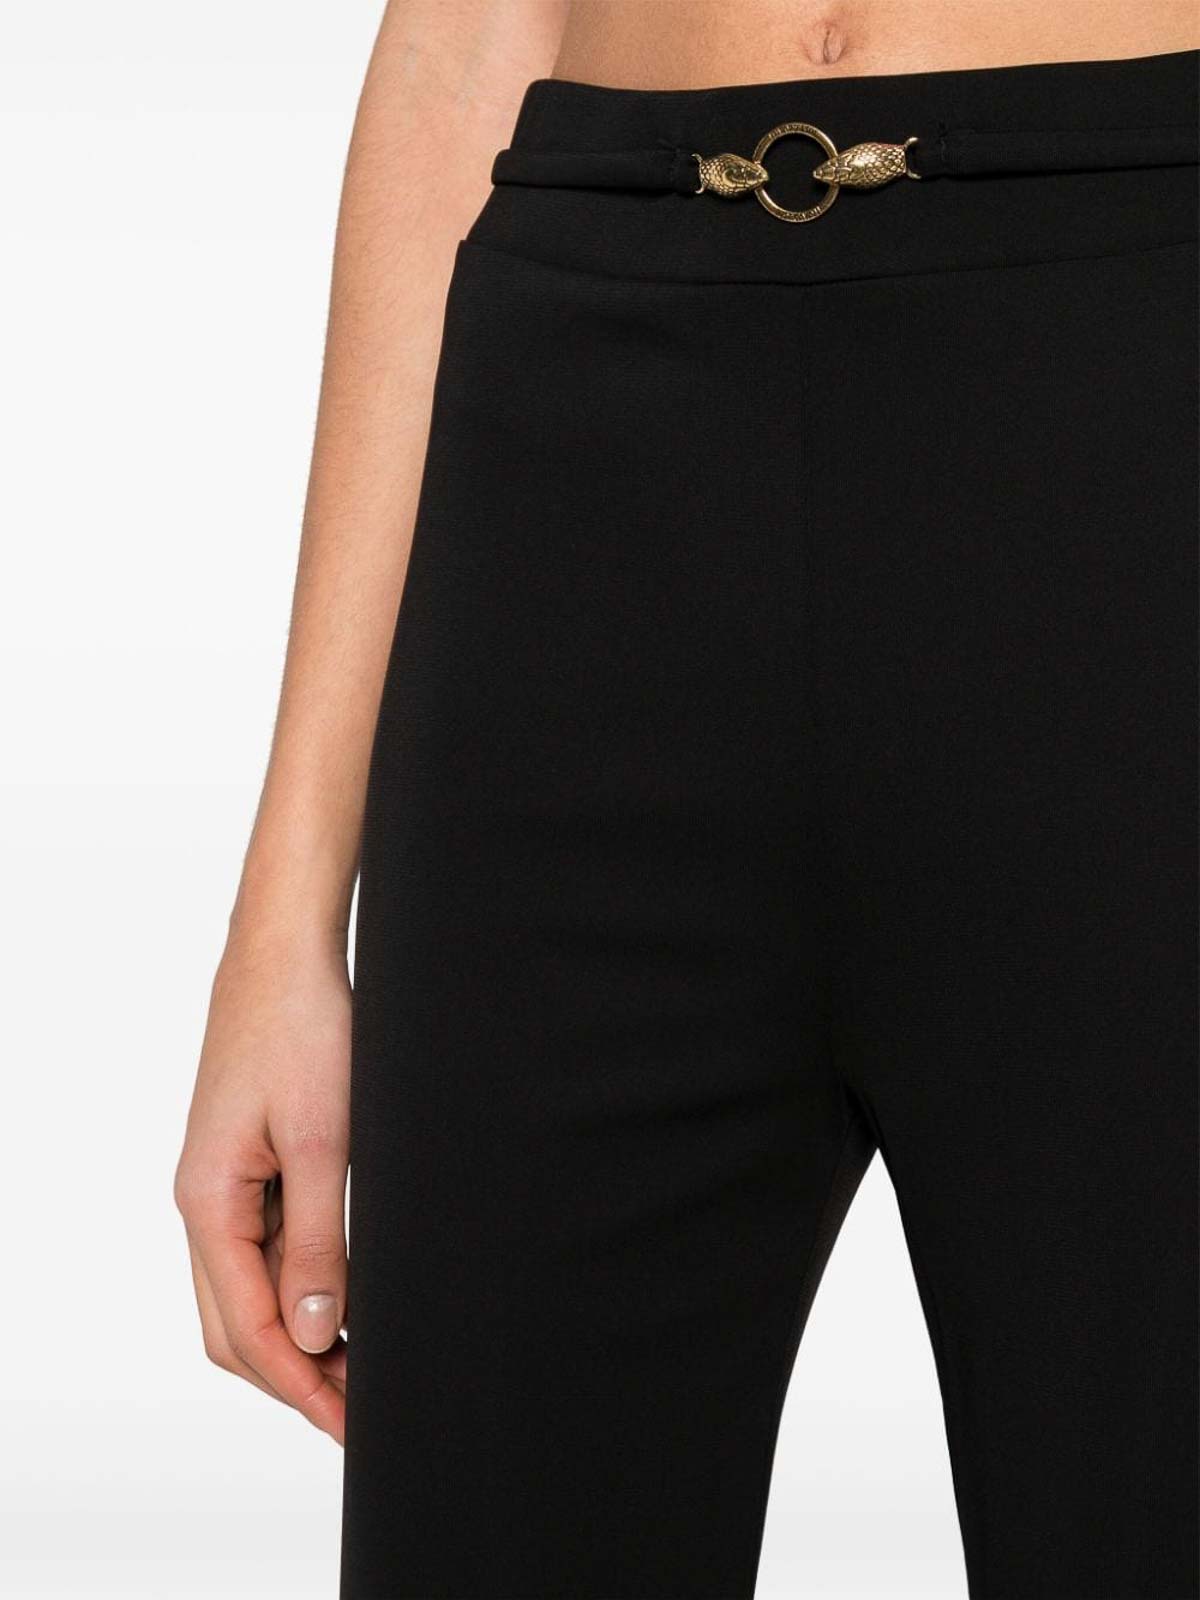 Shop Just Cavalli Logoed Trousers In Negro